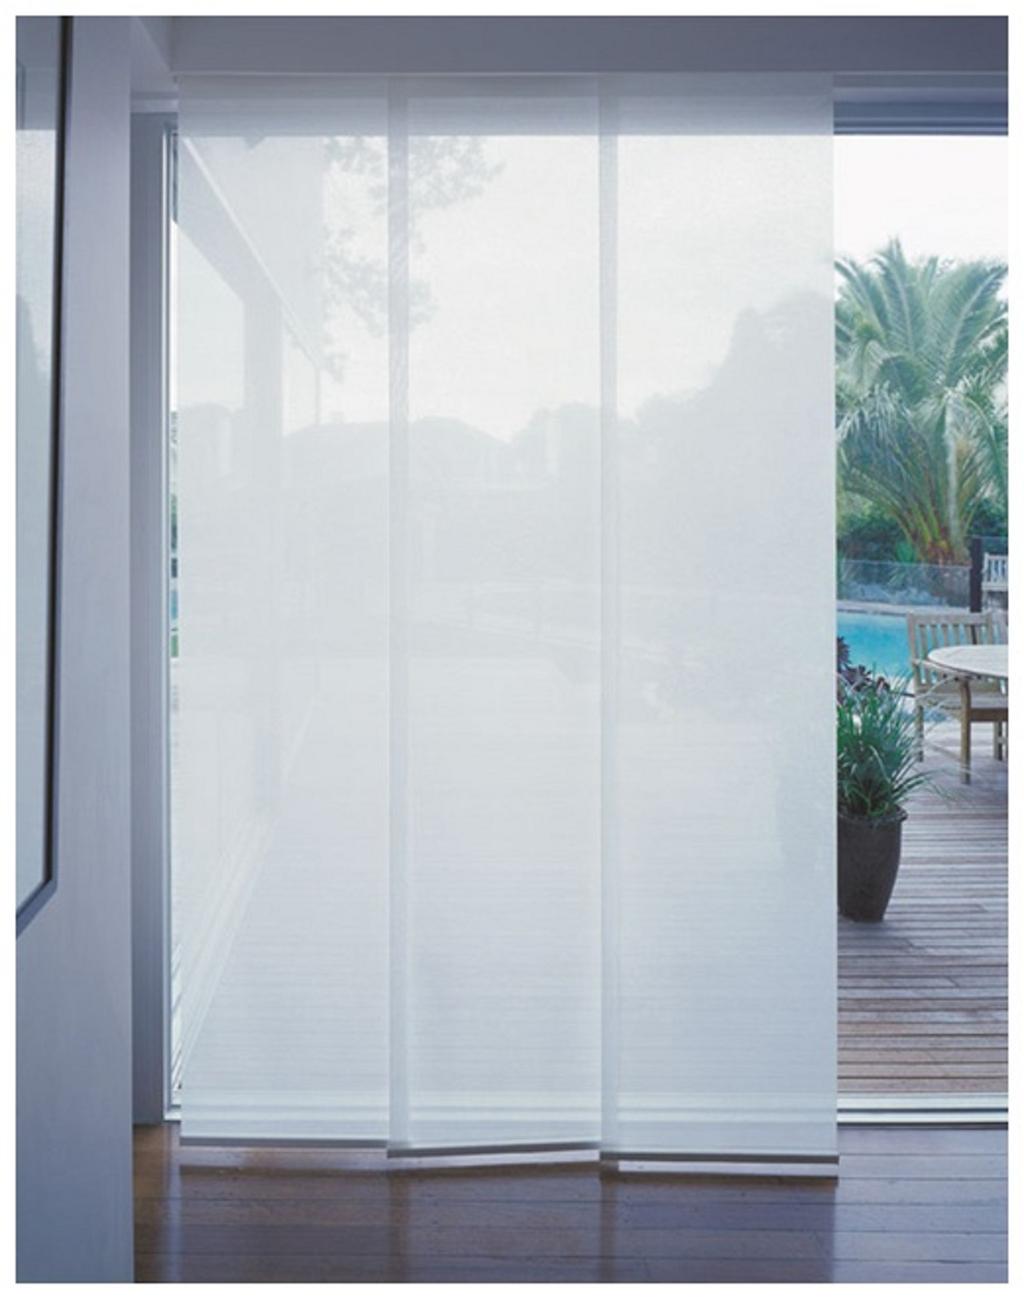 You have the choice of between 2 panels and up to 8 Panels per blind and they can be made as big